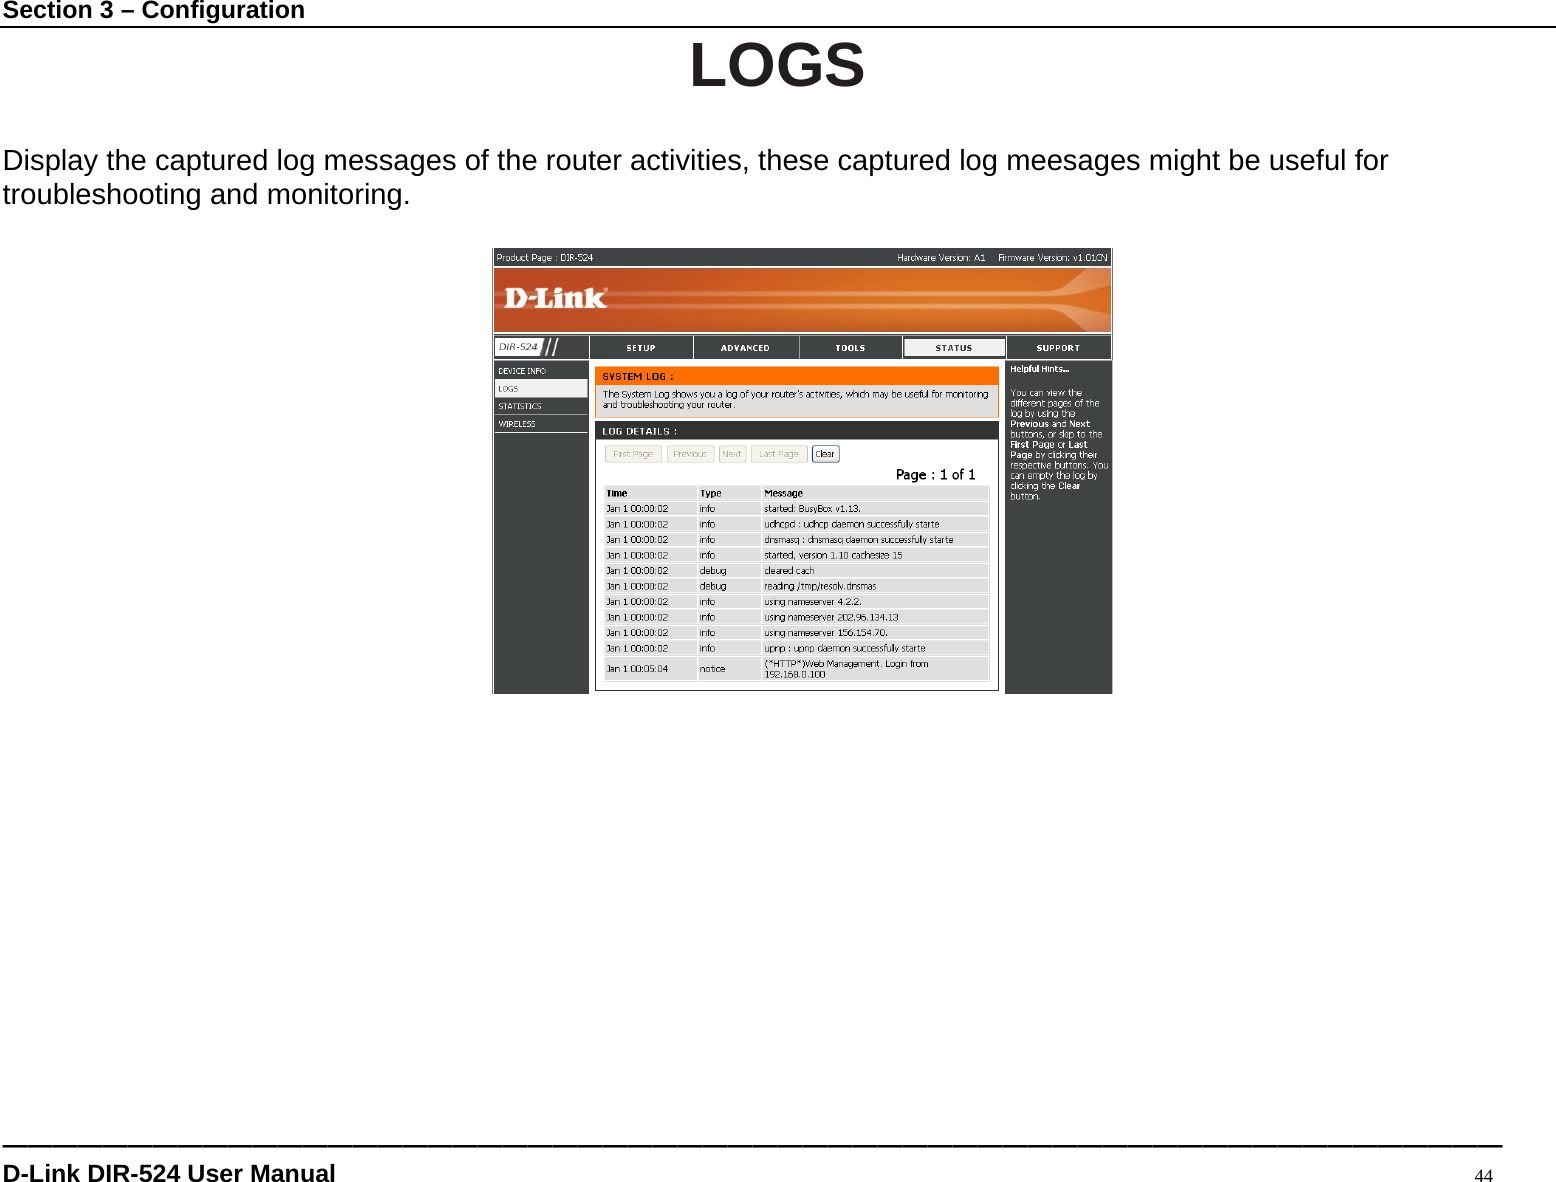 Section 3 – Configuration ———————————————————————————————————————————————————————————— D-Link DIR-524 User Manual                                                                                           44 LOGS  Display the captured log messages of the router activities, these captured log meesages might be useful for troubleshooting and monitoring.                      